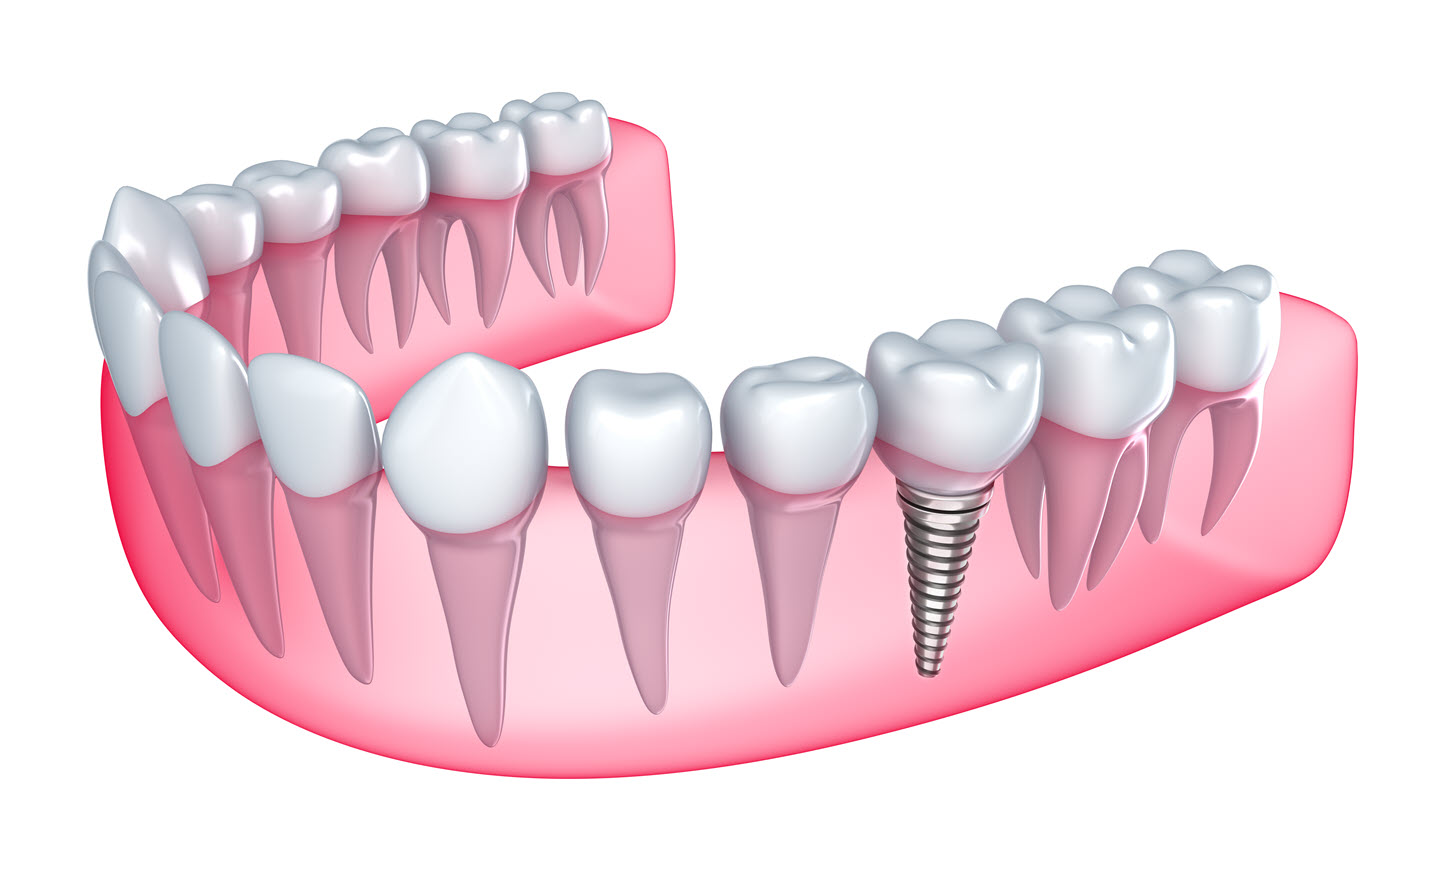 Affordable Dental Implants: Why You Shouldn't Settle for Missing Teeth